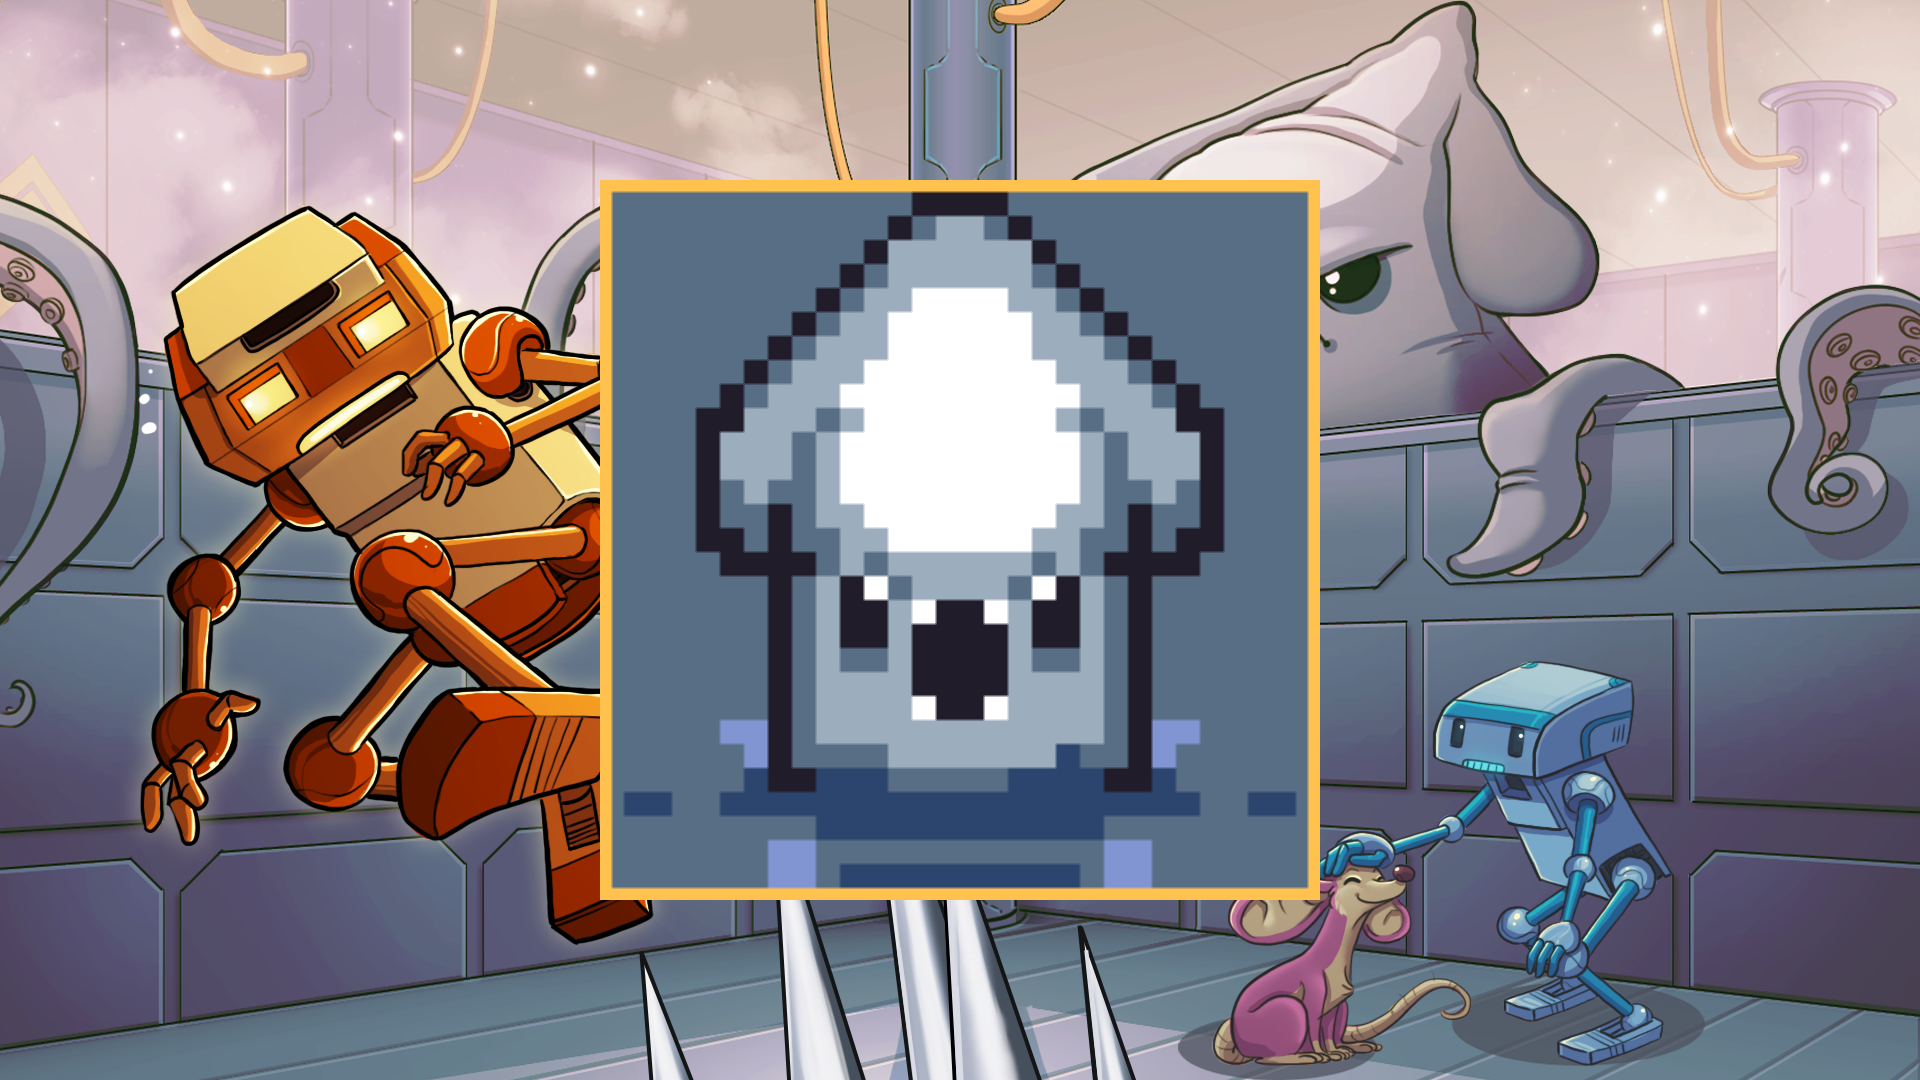 Icon for Boss